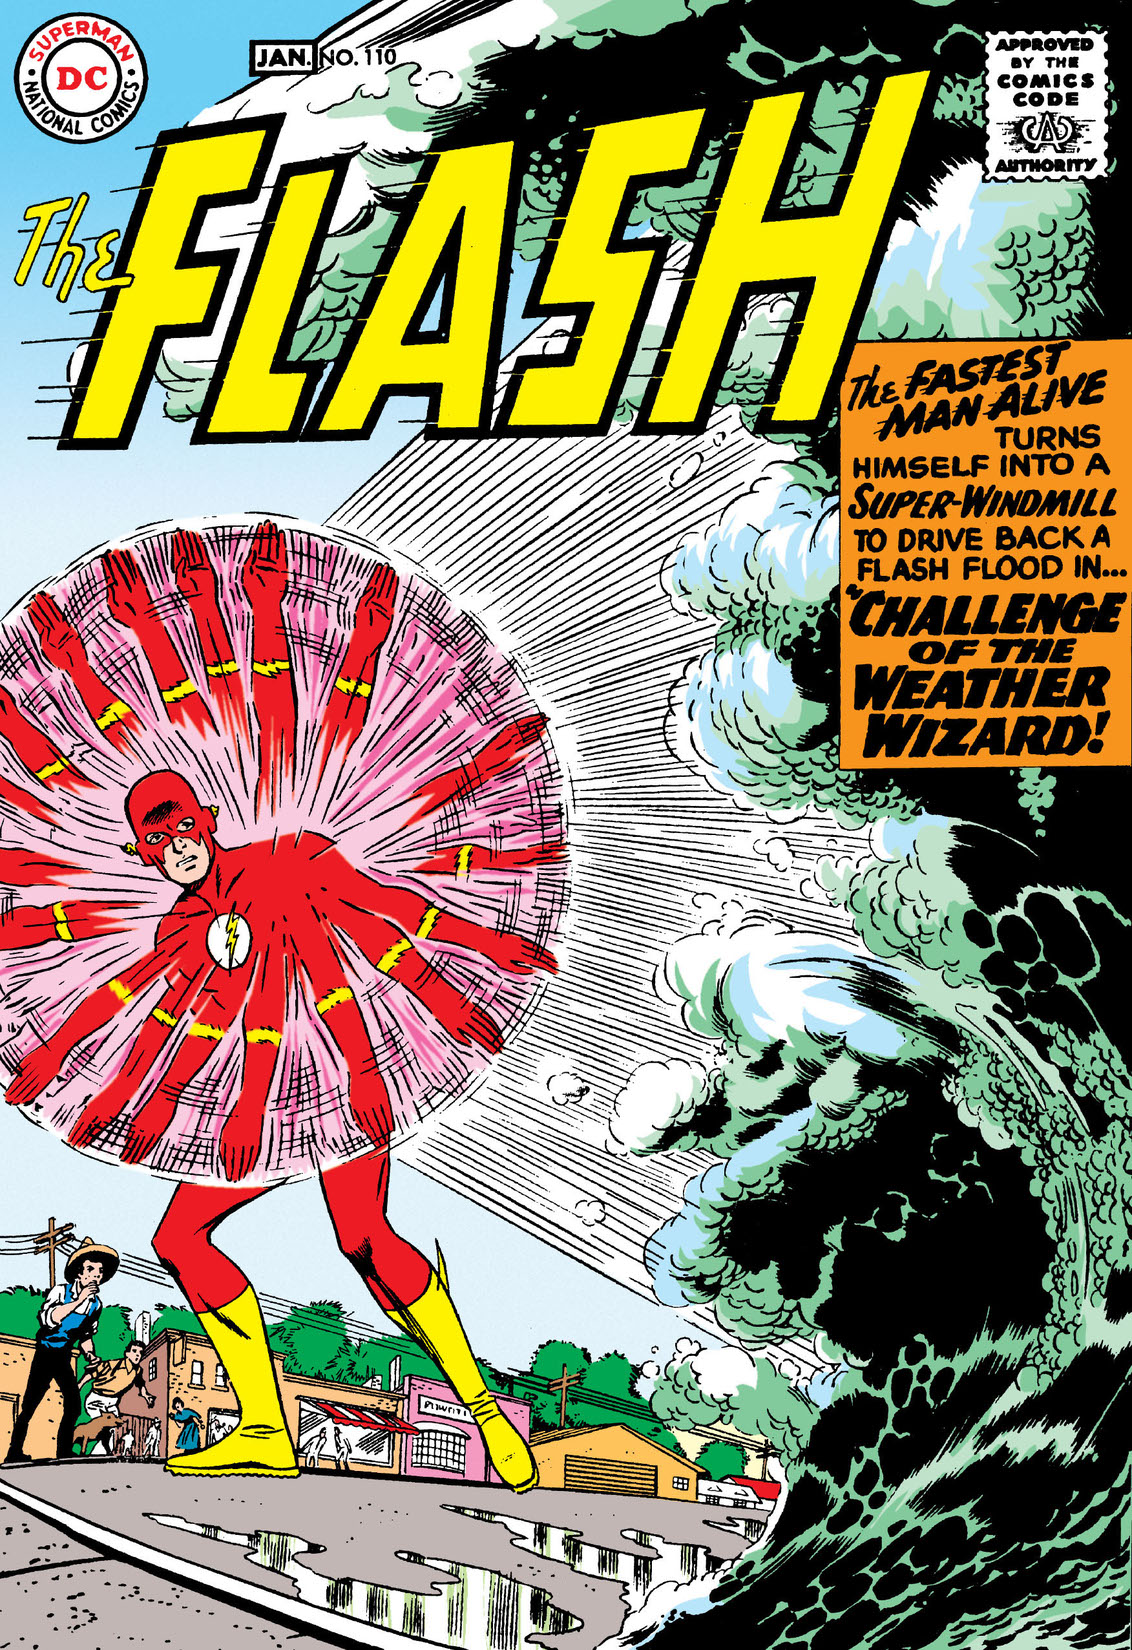 The Flash (1959-) #110 preview images